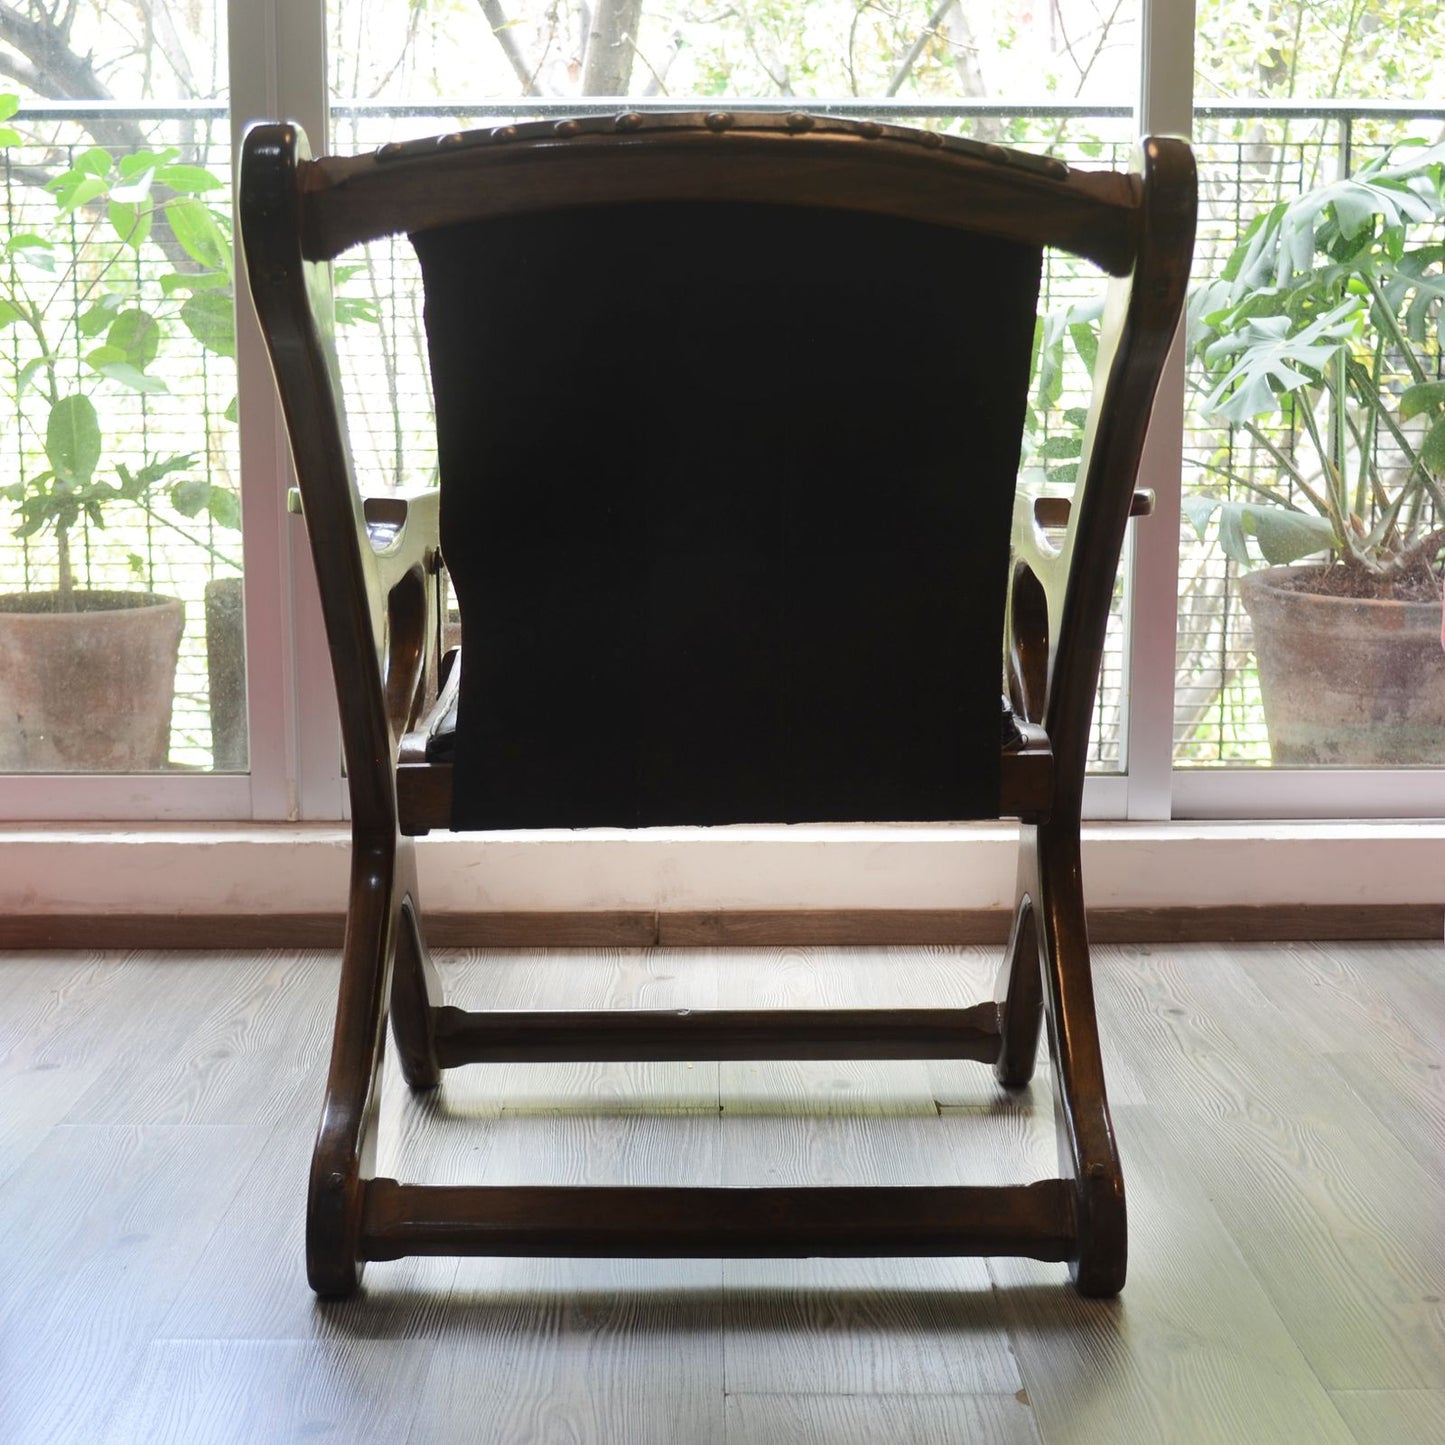 Sling Chair Don S. Shoemaker